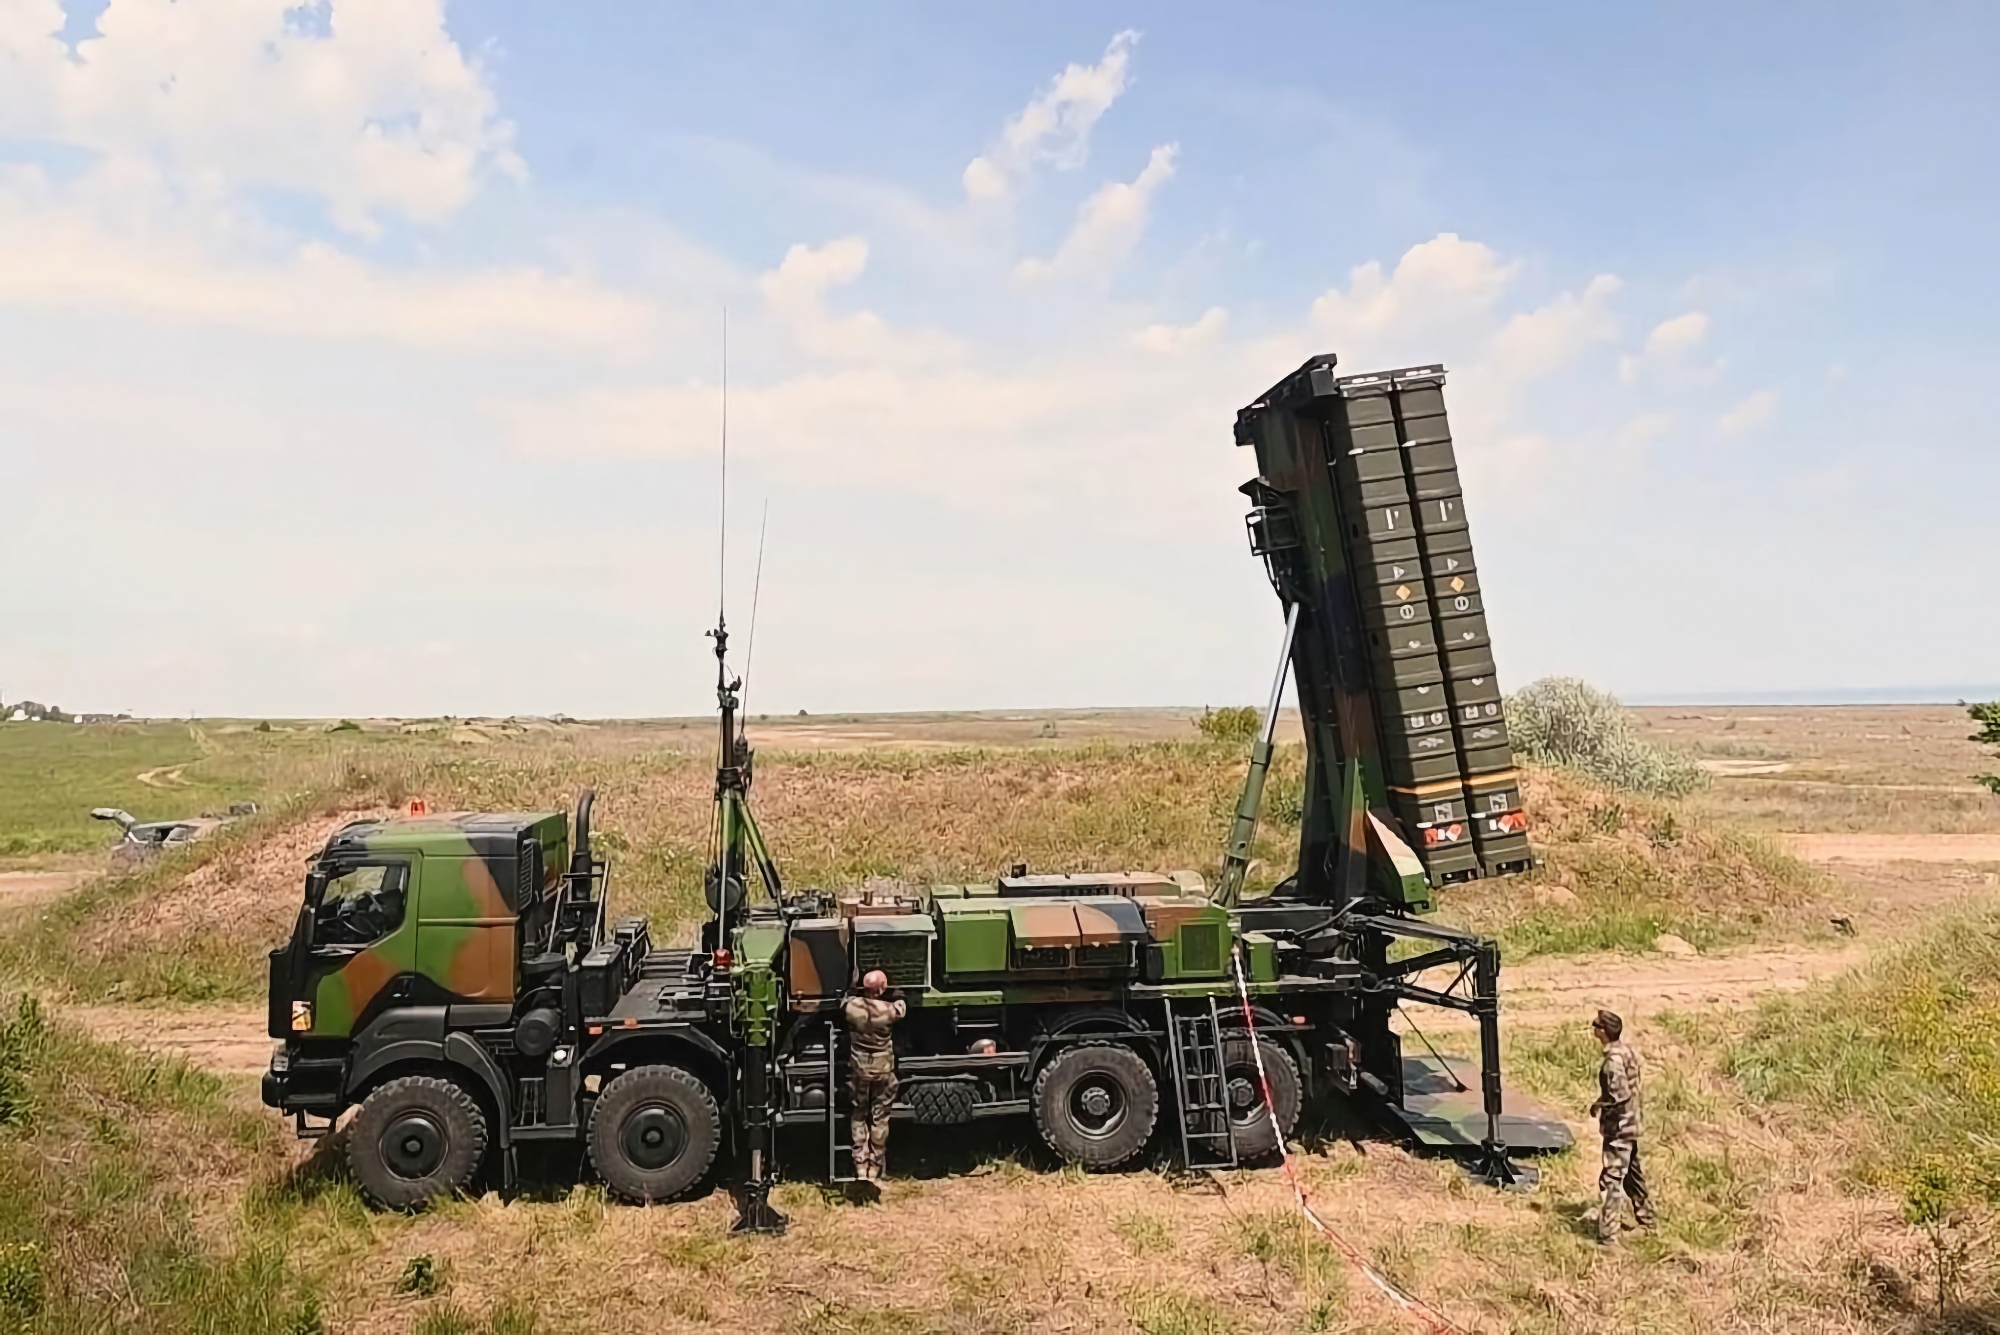 Media: Italy is ready to transfer air defense systems SAMP/T and Aspide to Ukraine